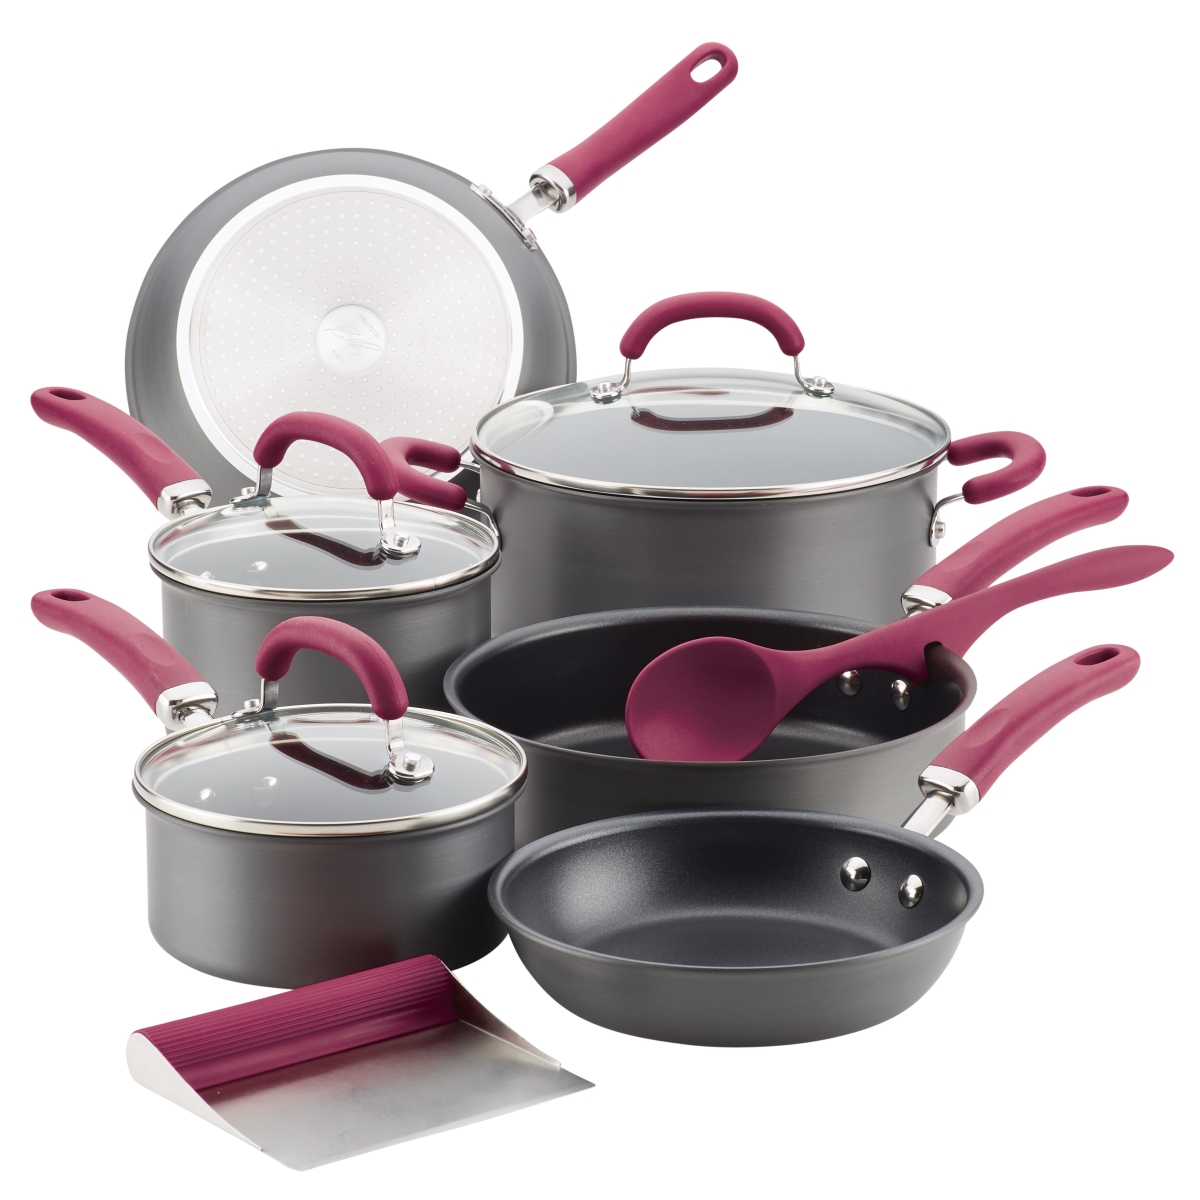 Picture of Rachael Ray 81124 Create Delicious Hard-Anodized Aluminum Nonstick Cookware Set, 11 Piece - Burgundy Handles